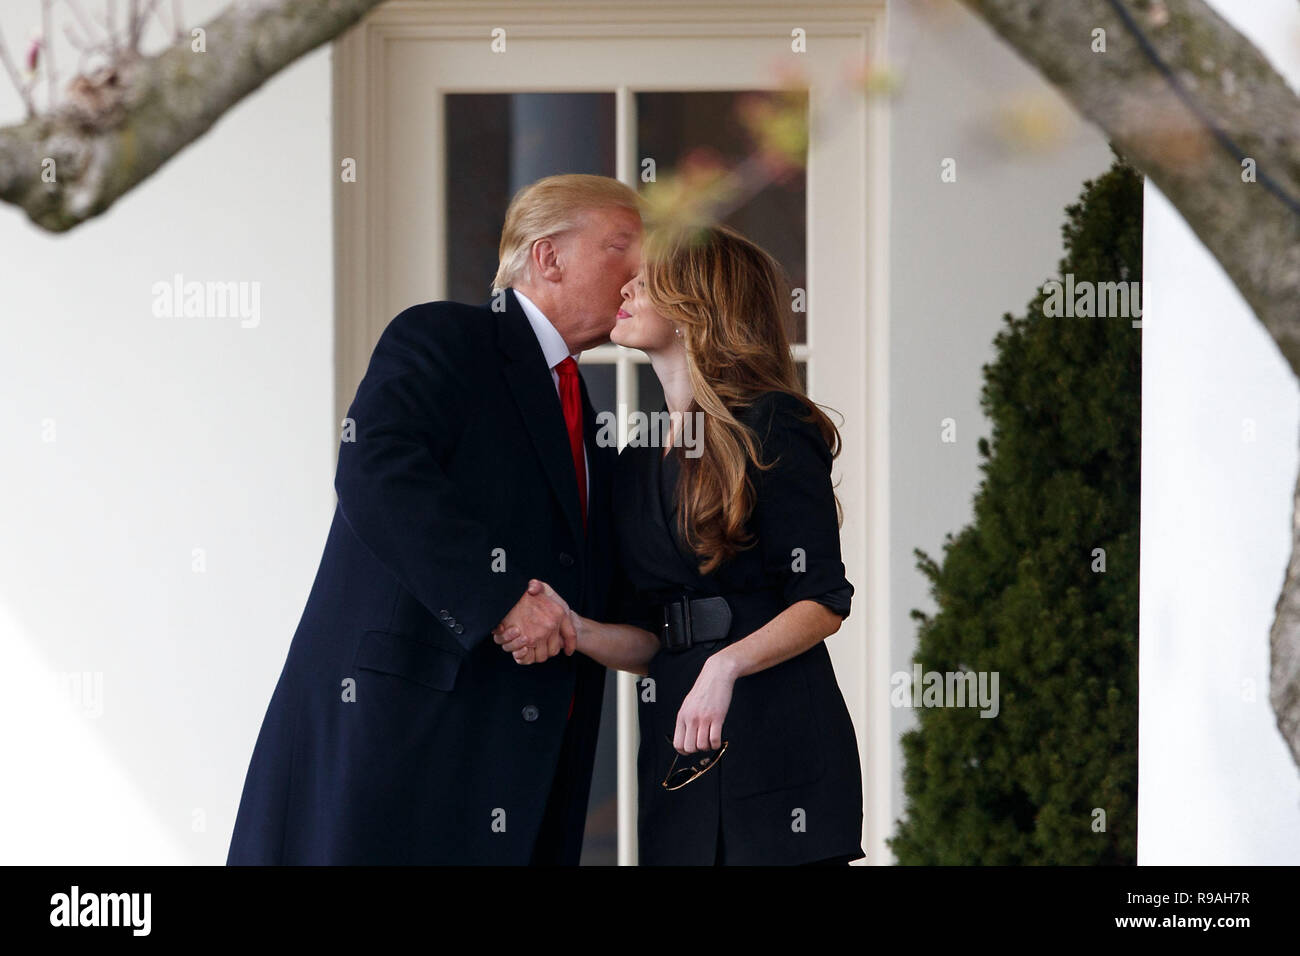 https://c8.alamy.com/comp/R9AH7R/new-york-usa-29th-mar-2018-us-president-donald-trump-l-kisses-outgoing-white-house-communications-director-hope-hicks-on-the-west-wing-colonnade-before-departing-from-the-white-house-in-washington-dc-the-united-states-on-march-29-2018-white-house-communications-director-hope-hicks-said-wednesday-that-she-is-resigning-becoming-the-third-person-to-leave-the-post-during-president-donald-trumps-tenure-beginning-in-january-2017-credit-ting-shenxinhuaalamy-live-news-R9AH7R.jpg